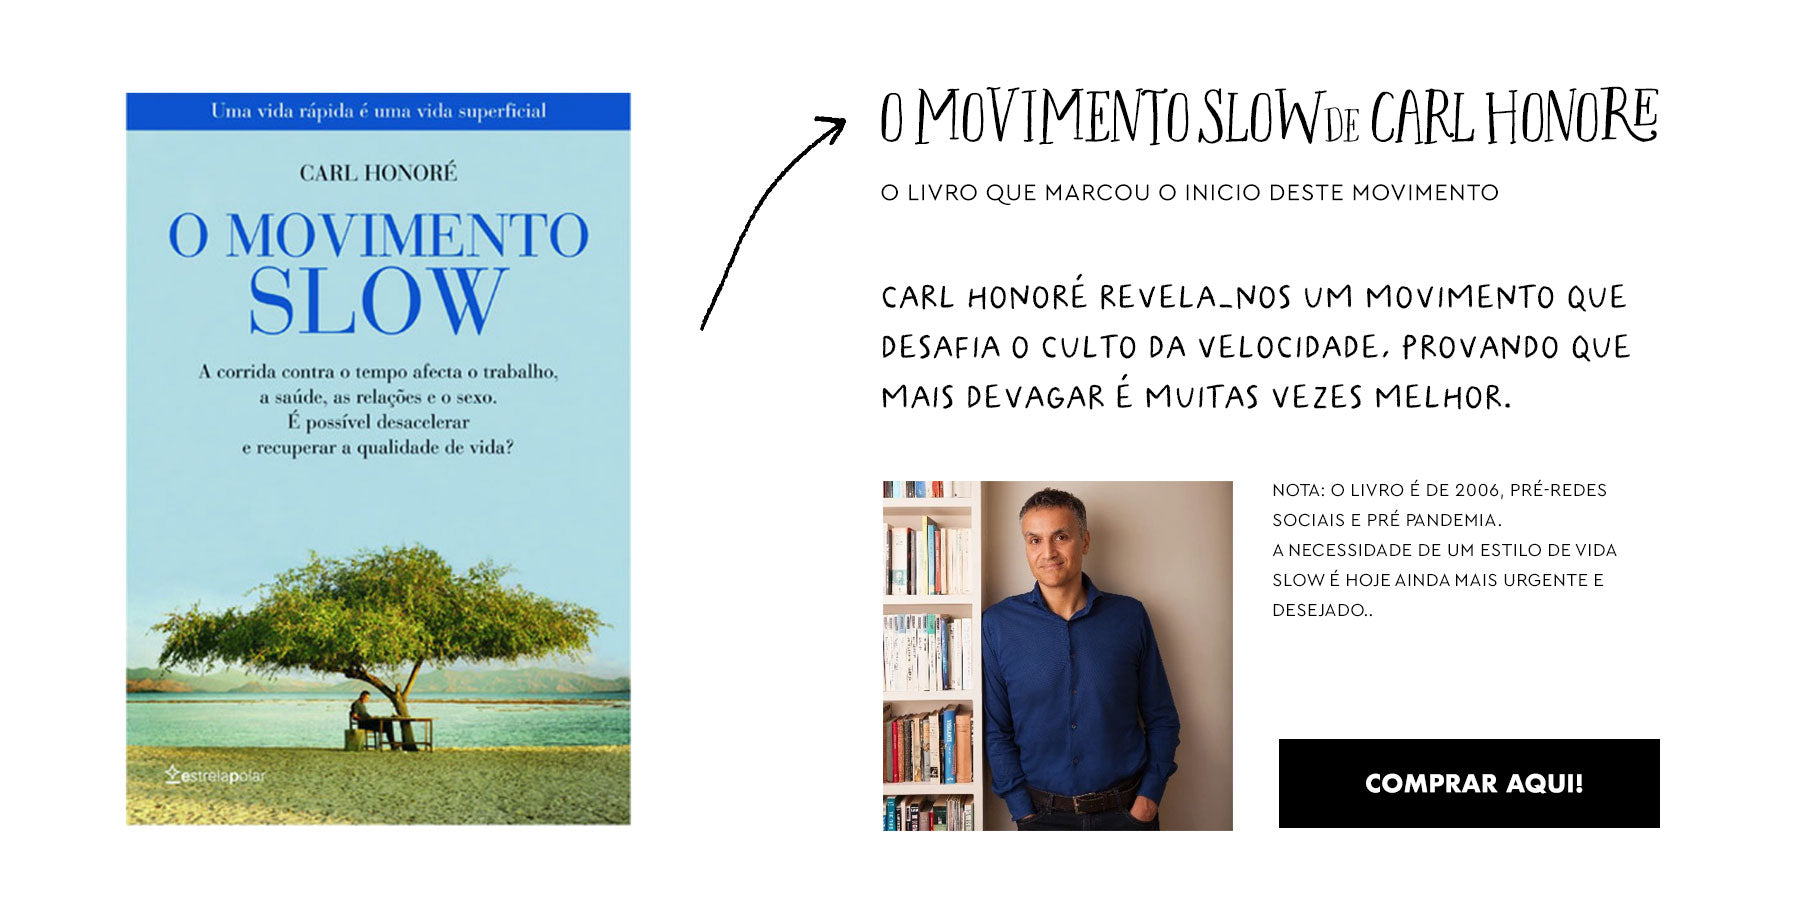 The Slow Movement by Carl Honoré